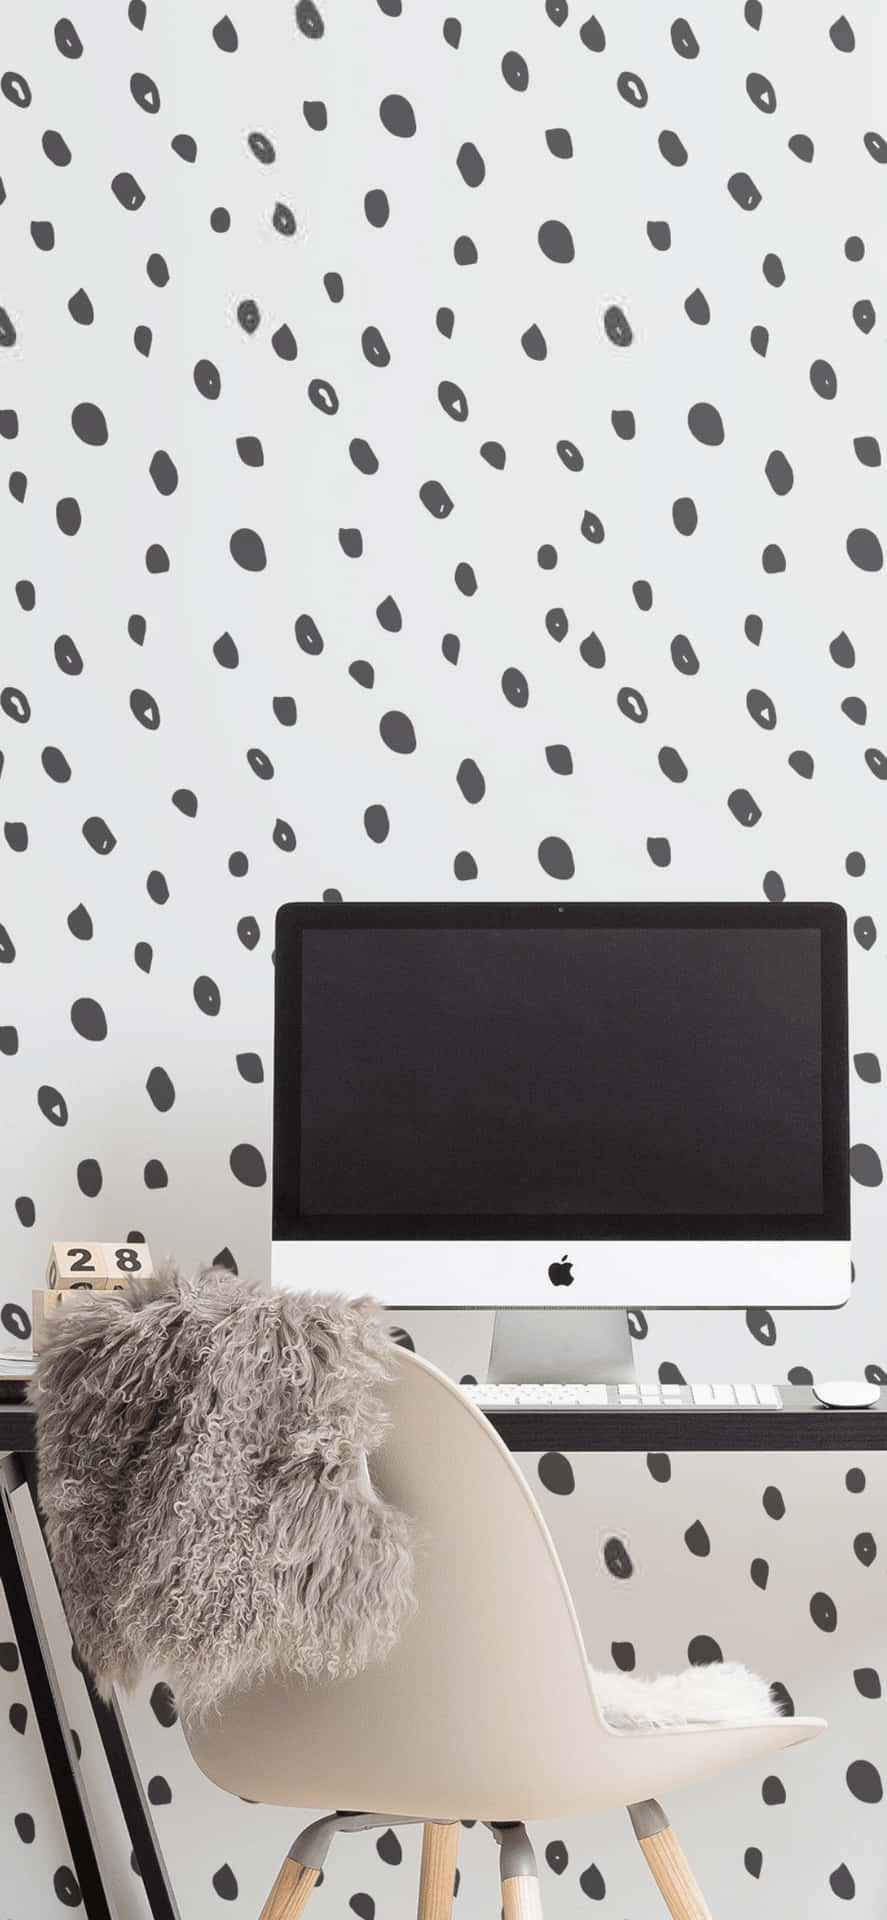 Black Spots iPhone X Office Background